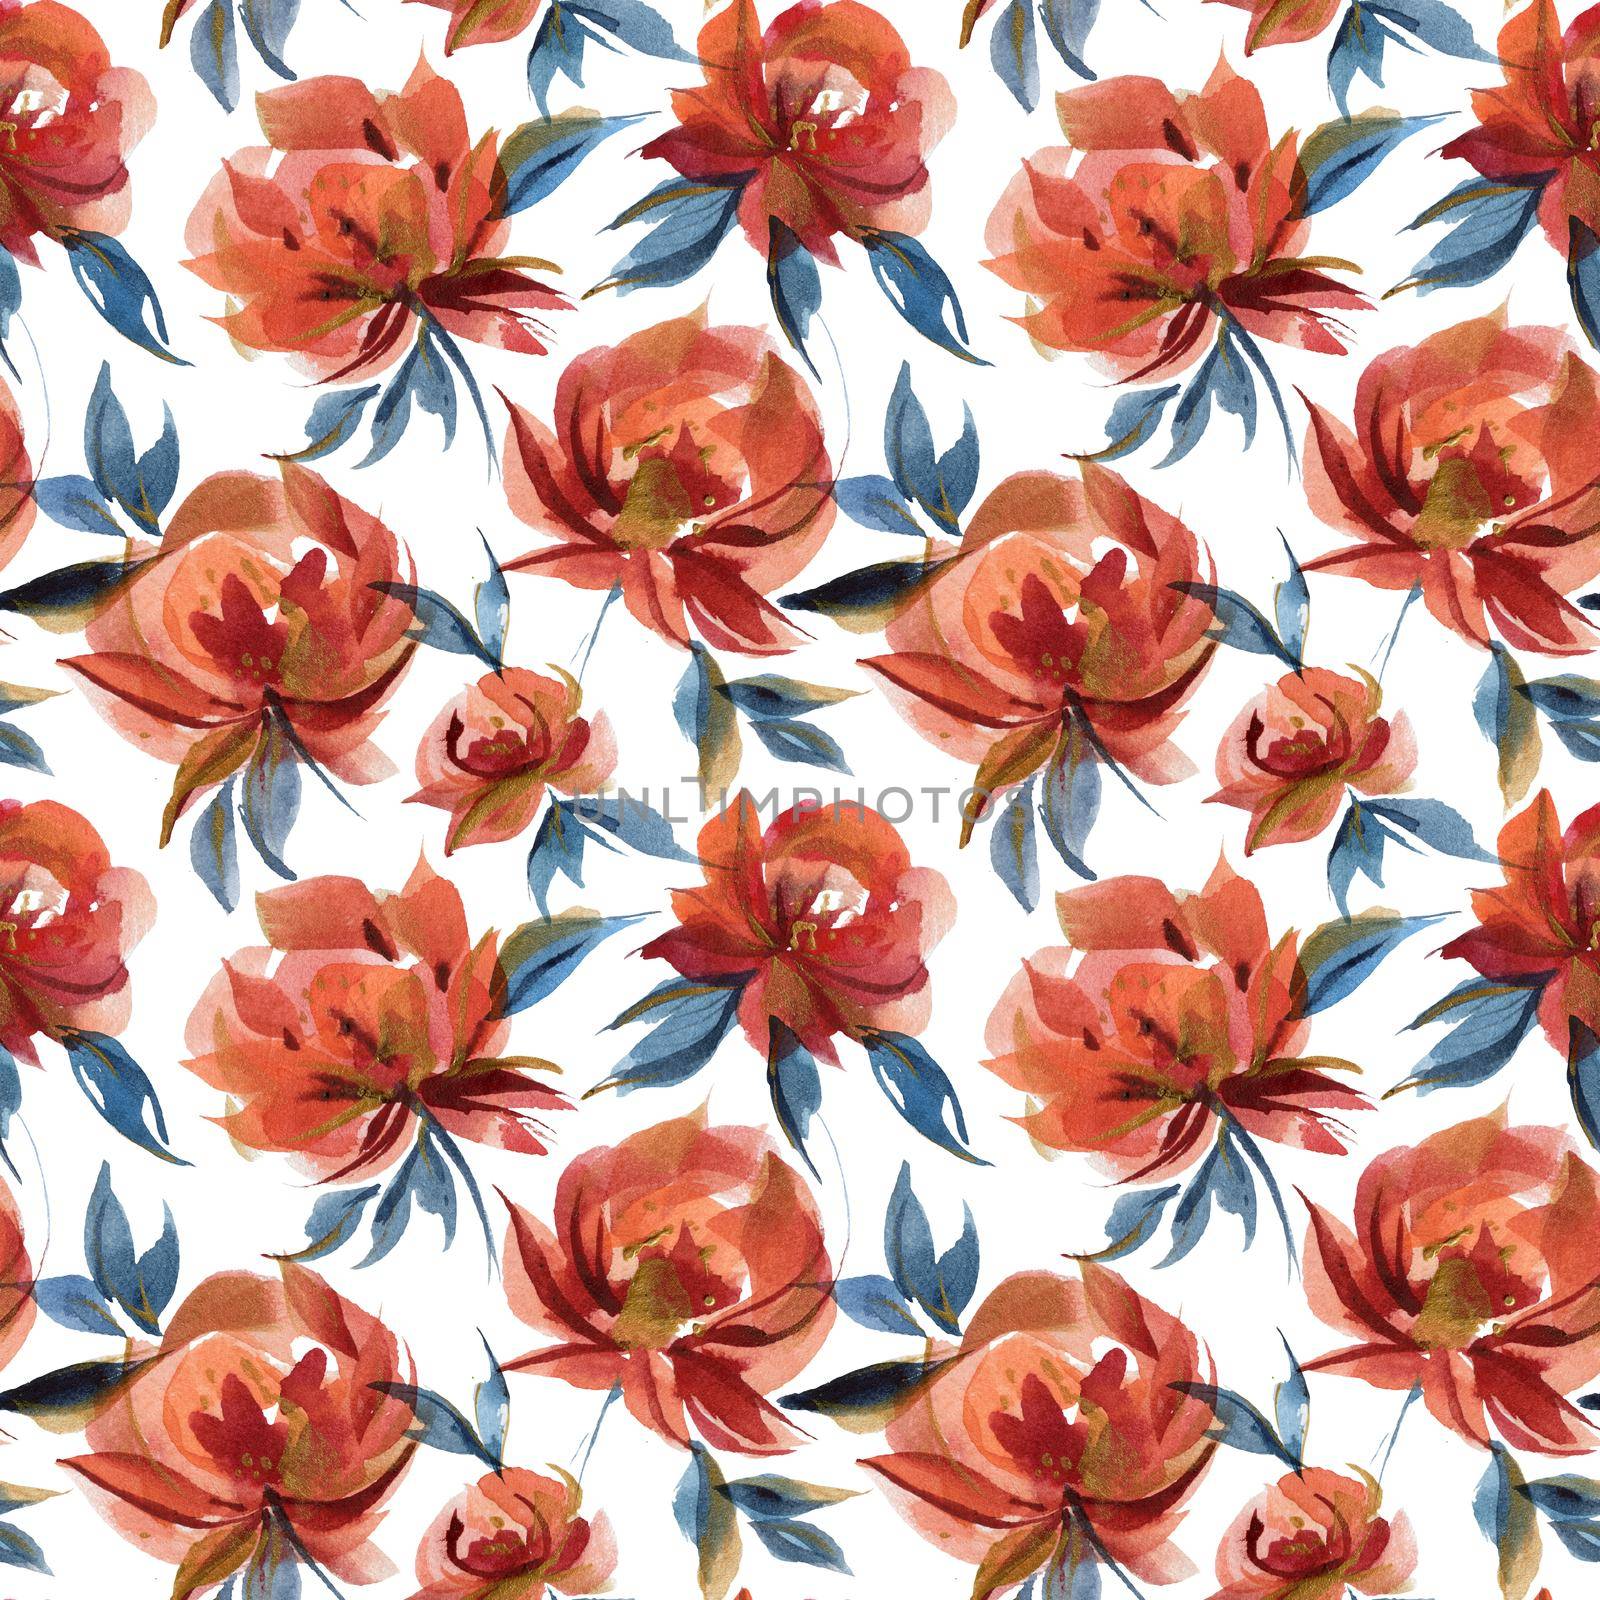 Watercolor ditsy pattern. Seamles pattern of traditional folk rose flowers. Blue and orange and white colors. Countryside cottage trend